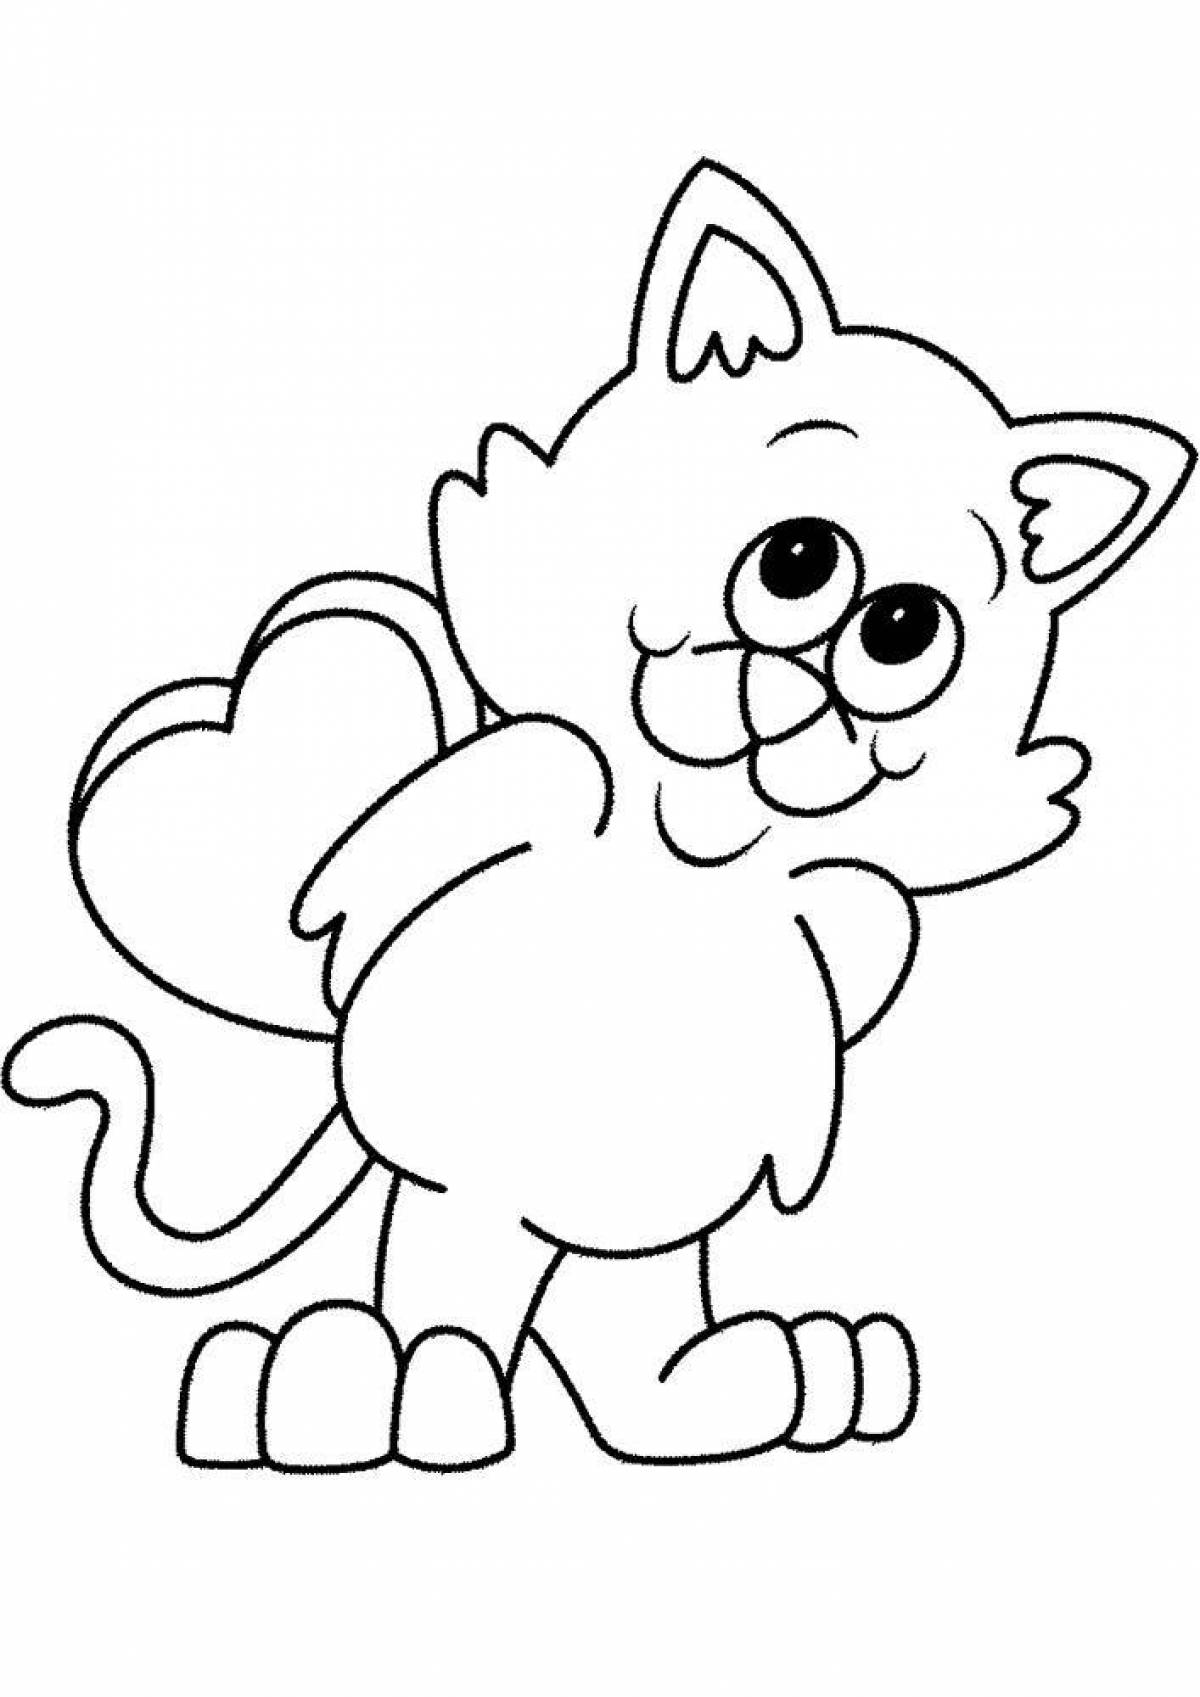 Coloring page mischievous cat with a heart